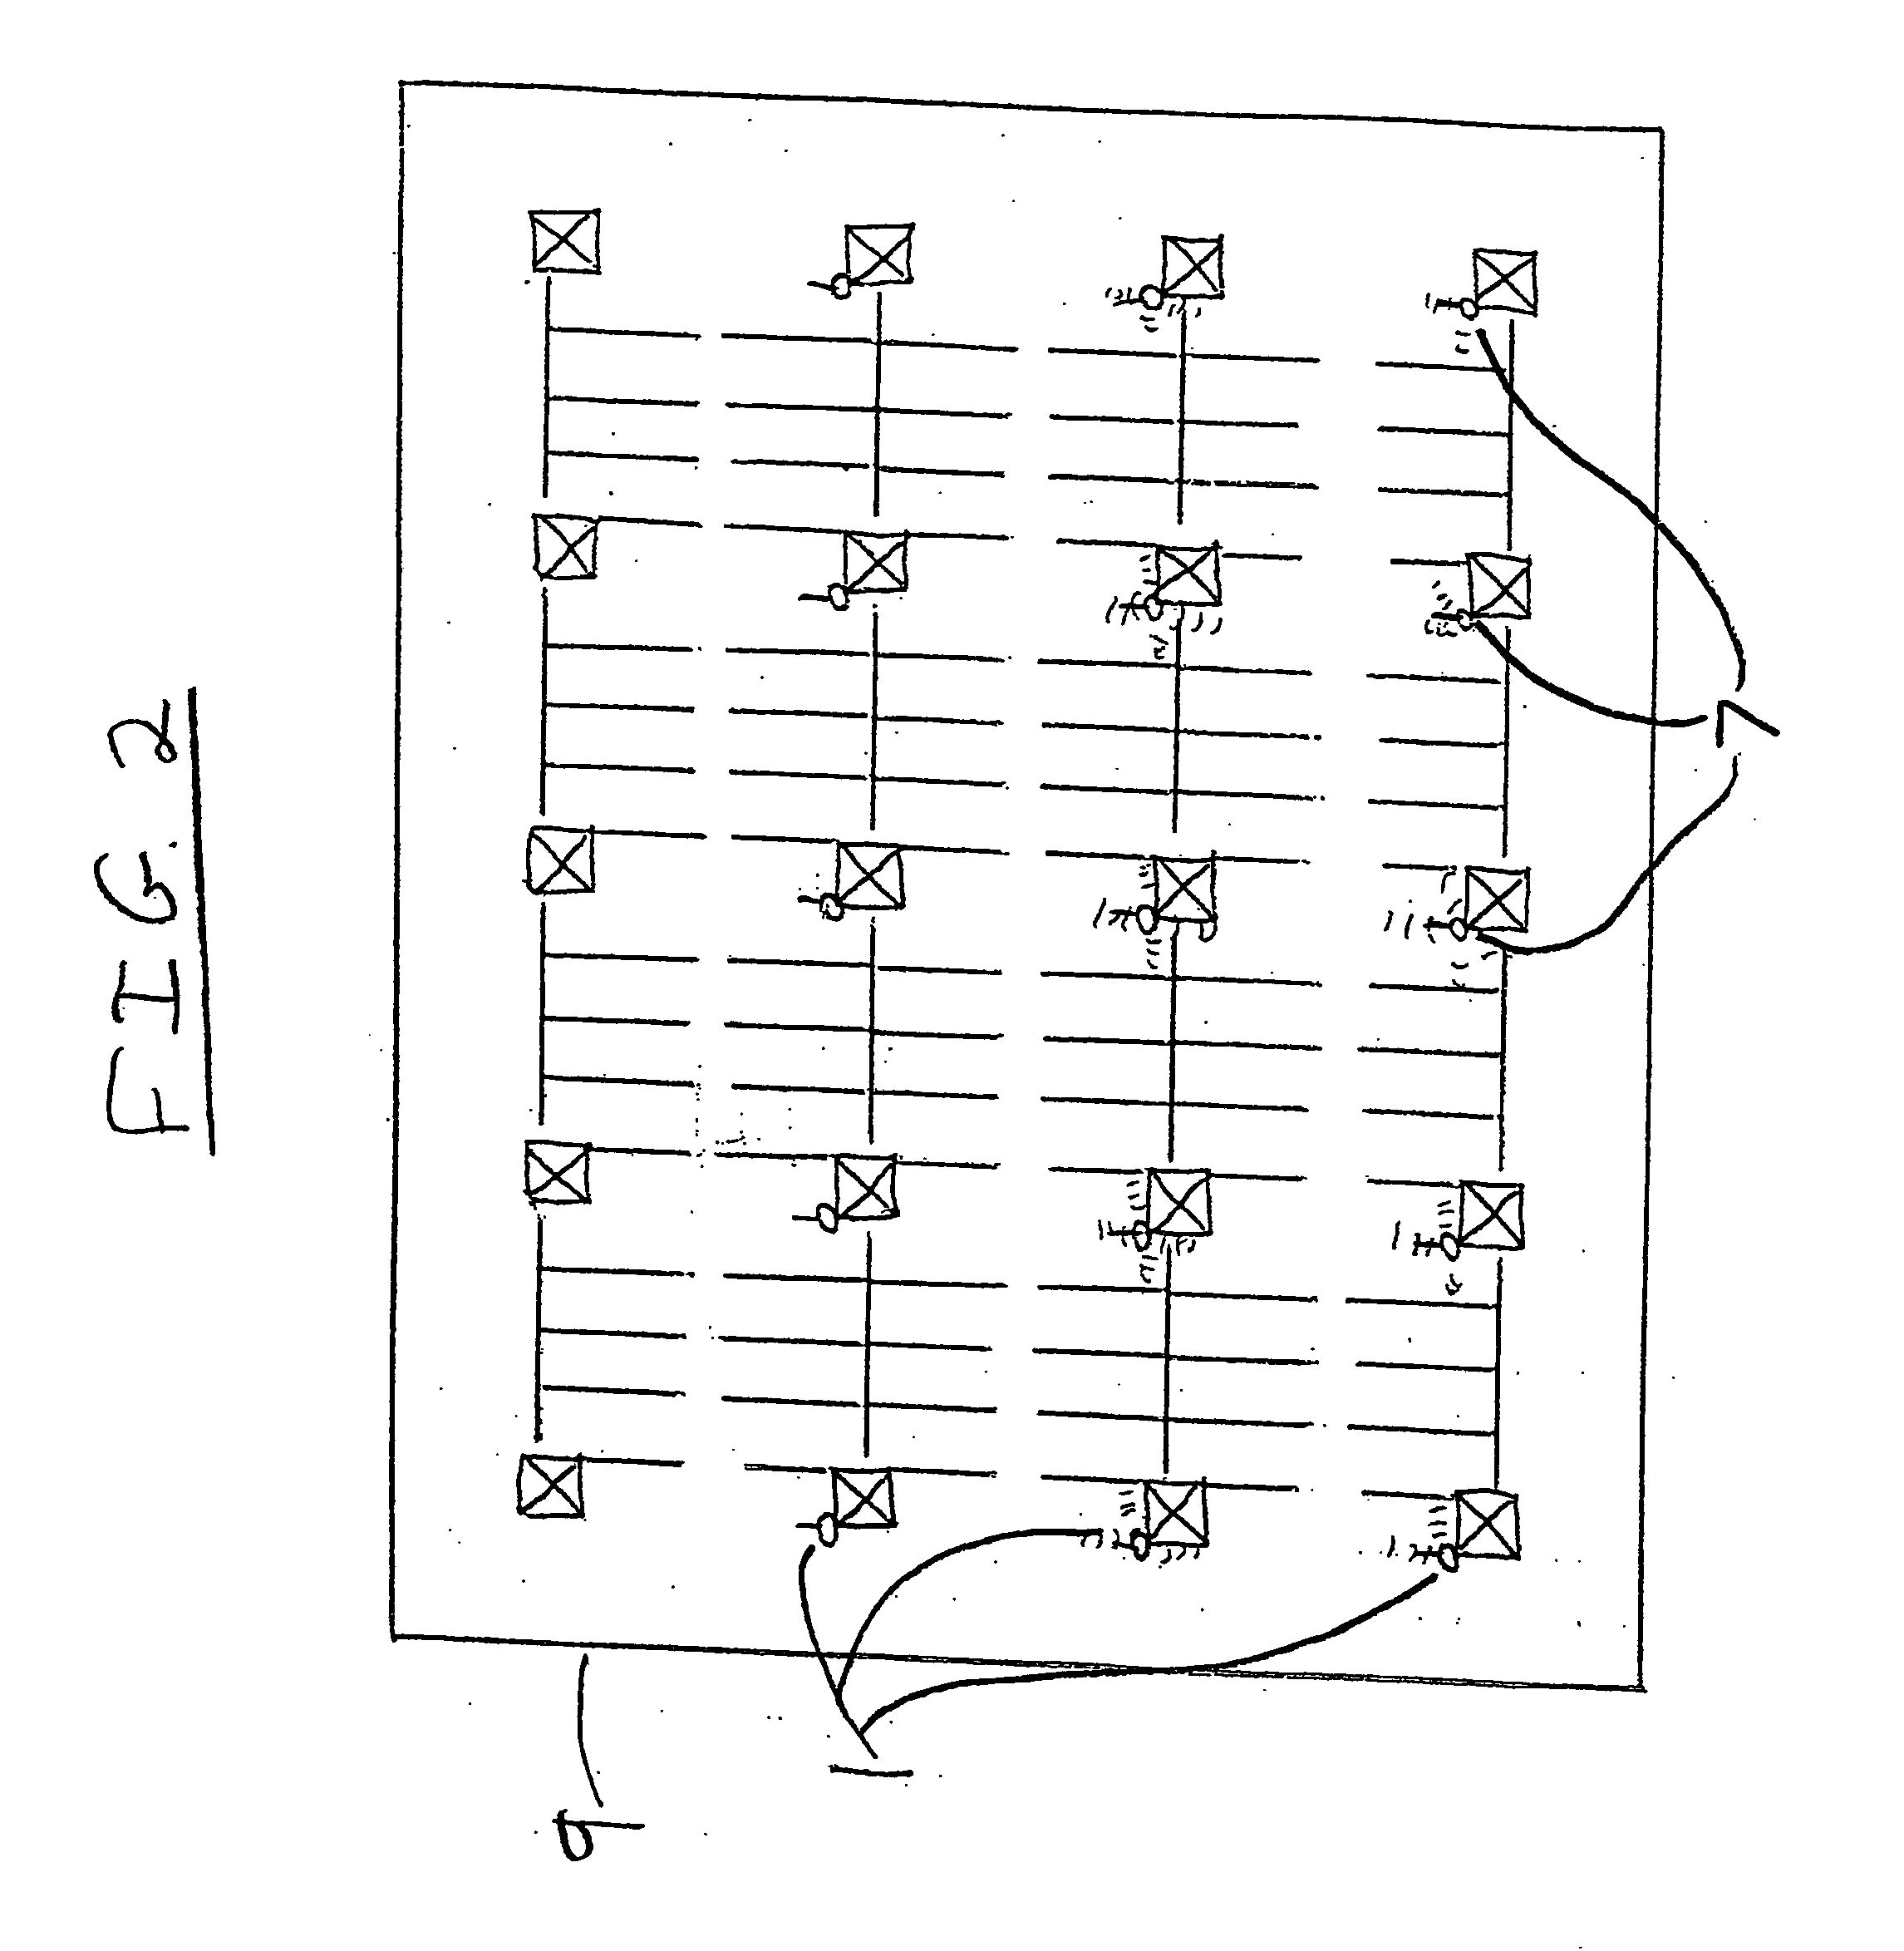 Parked vehicle re-location and advertising/promotion/coupon distribution device